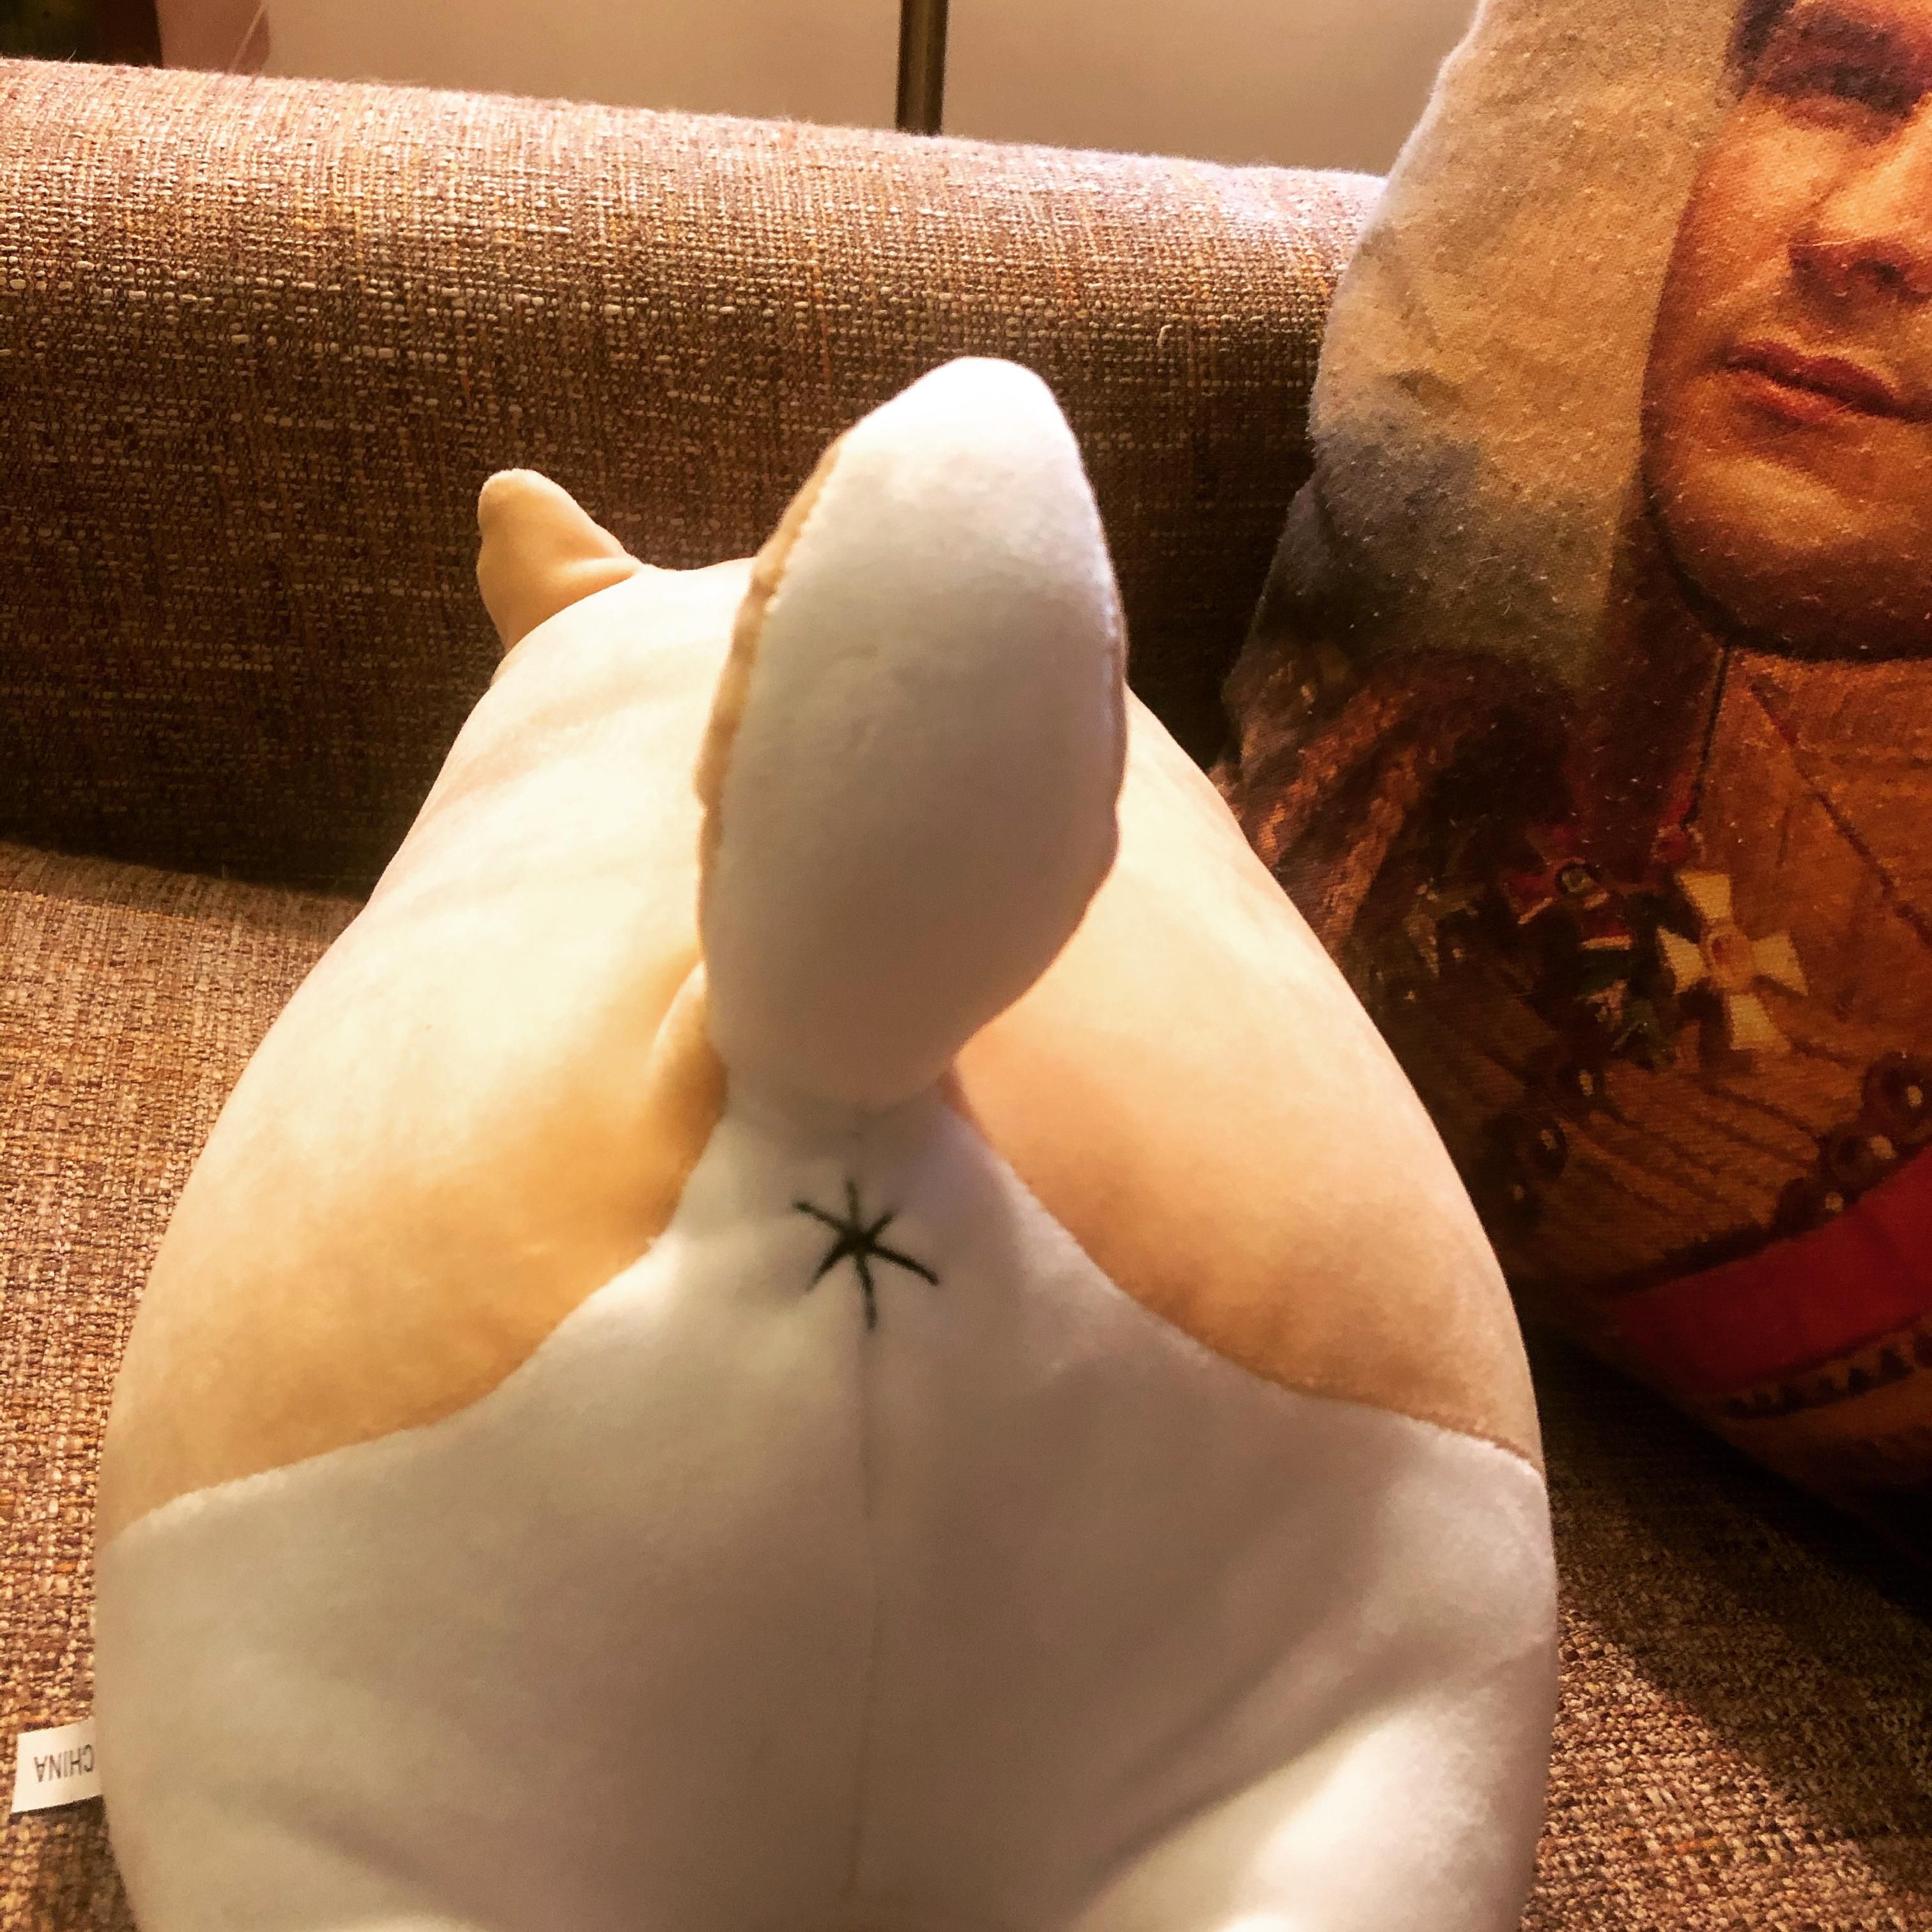 My kid asked for a stuffed Corgi for her birthday. It arrived with a butt-hole. Just thought you all should know.